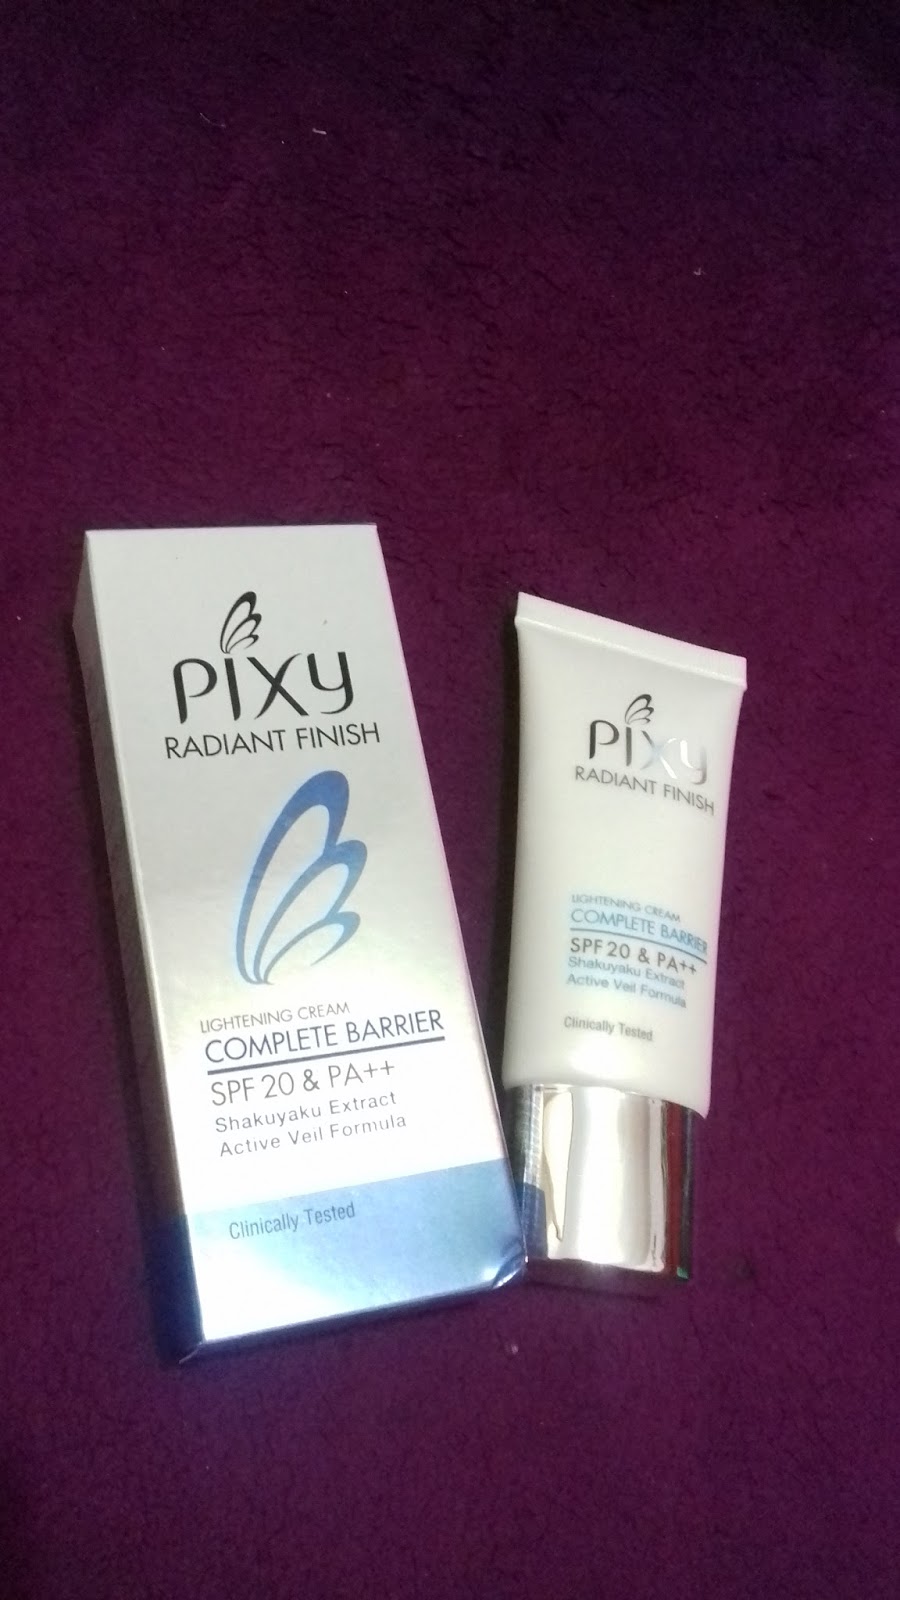 Review Pixy Radiant Finish